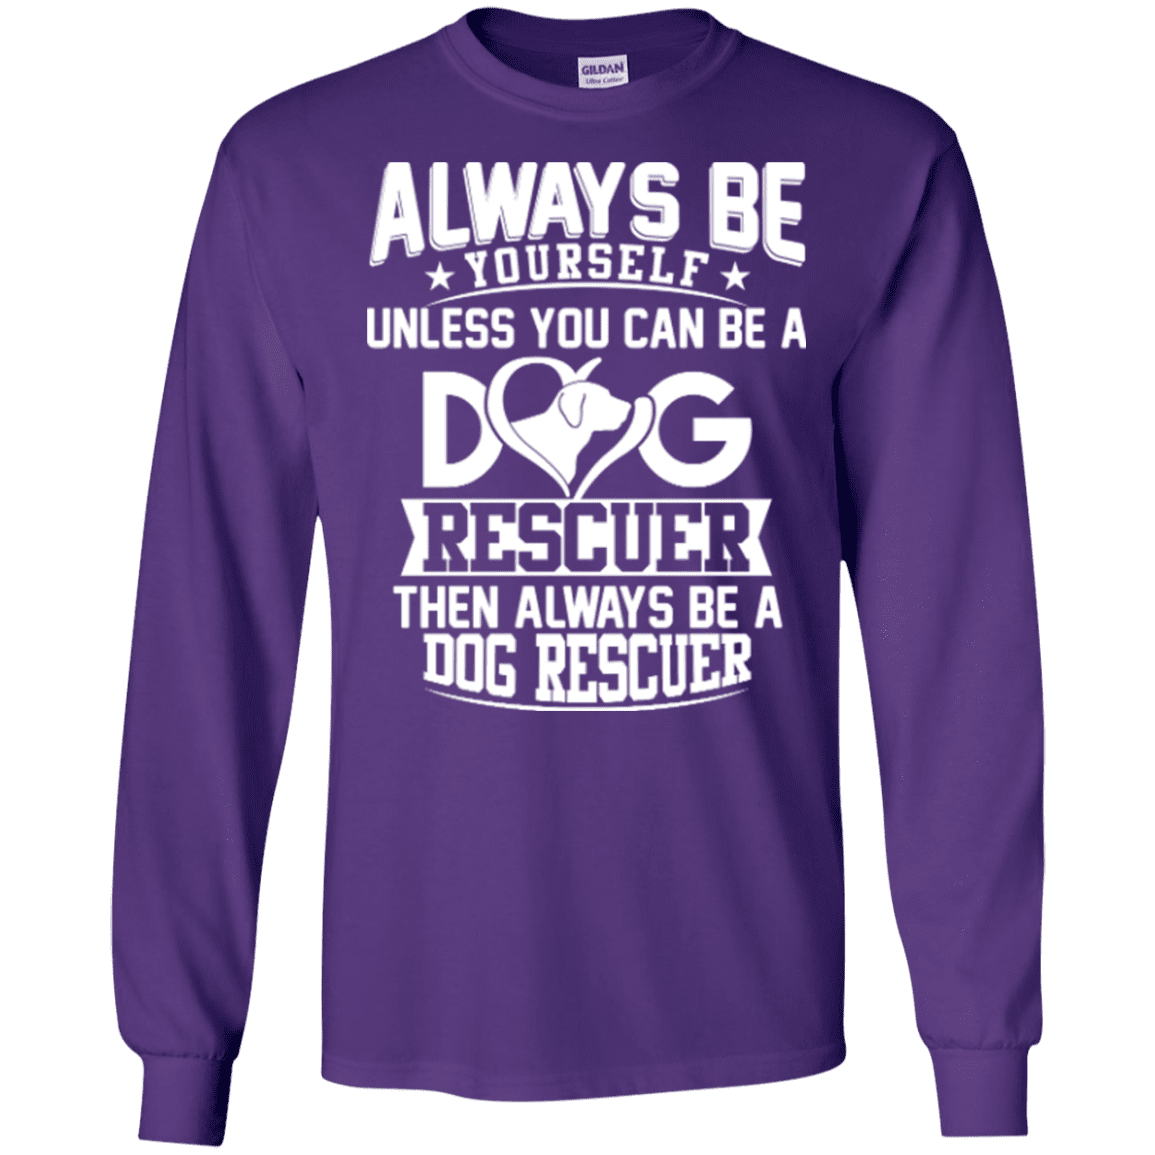 Always Be A Dog Rescuer - Long Sleeve T Shirt.